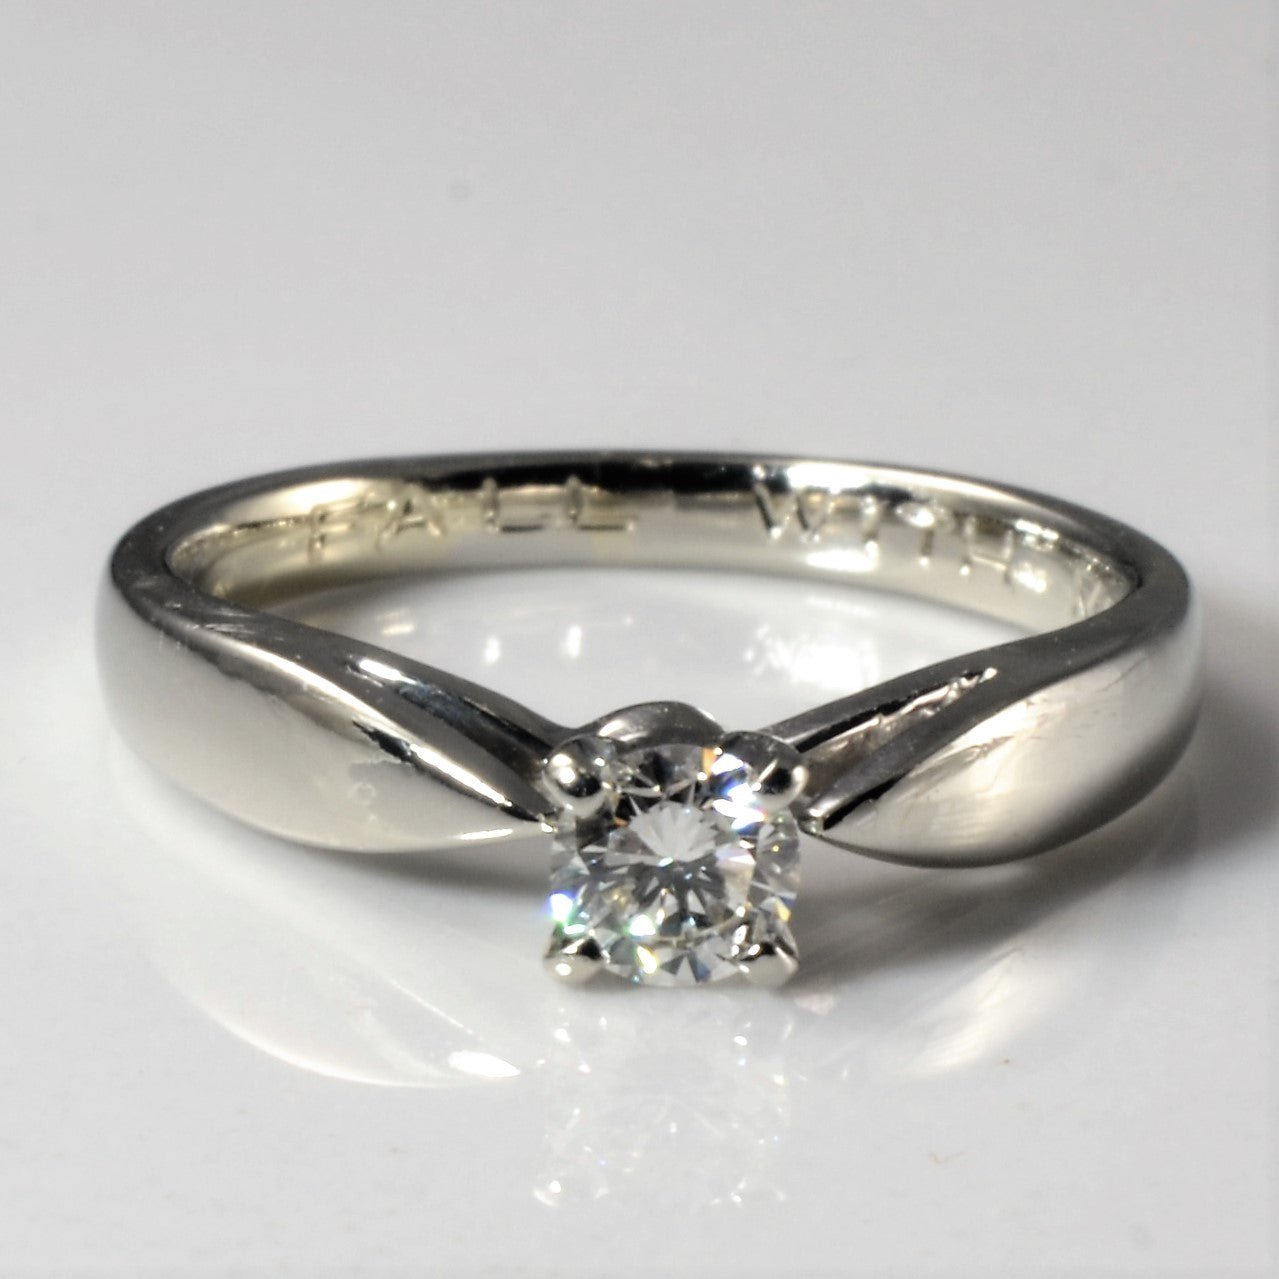 Tapered solitaire round brilliant cut engagement rings for sale in Canada